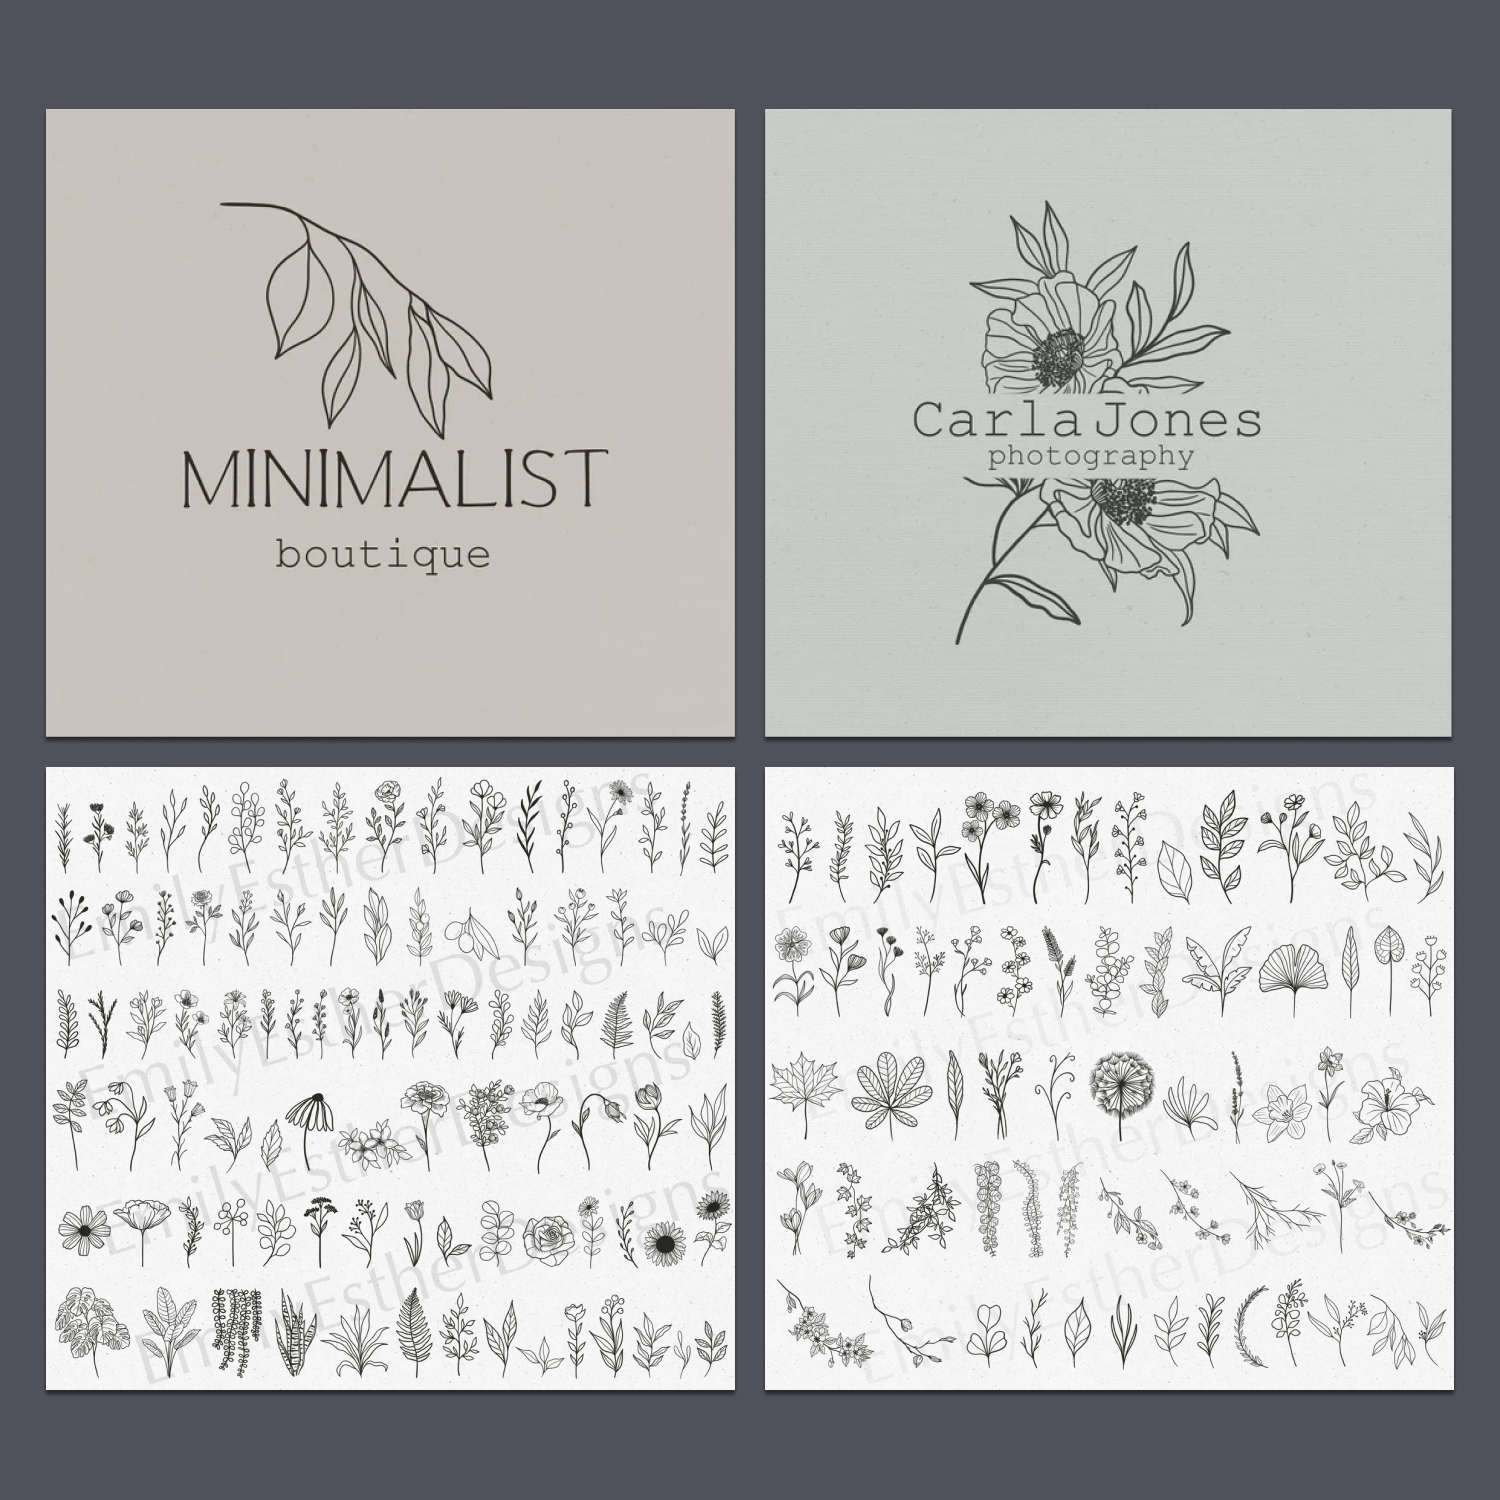 Various logos and plants for prints.